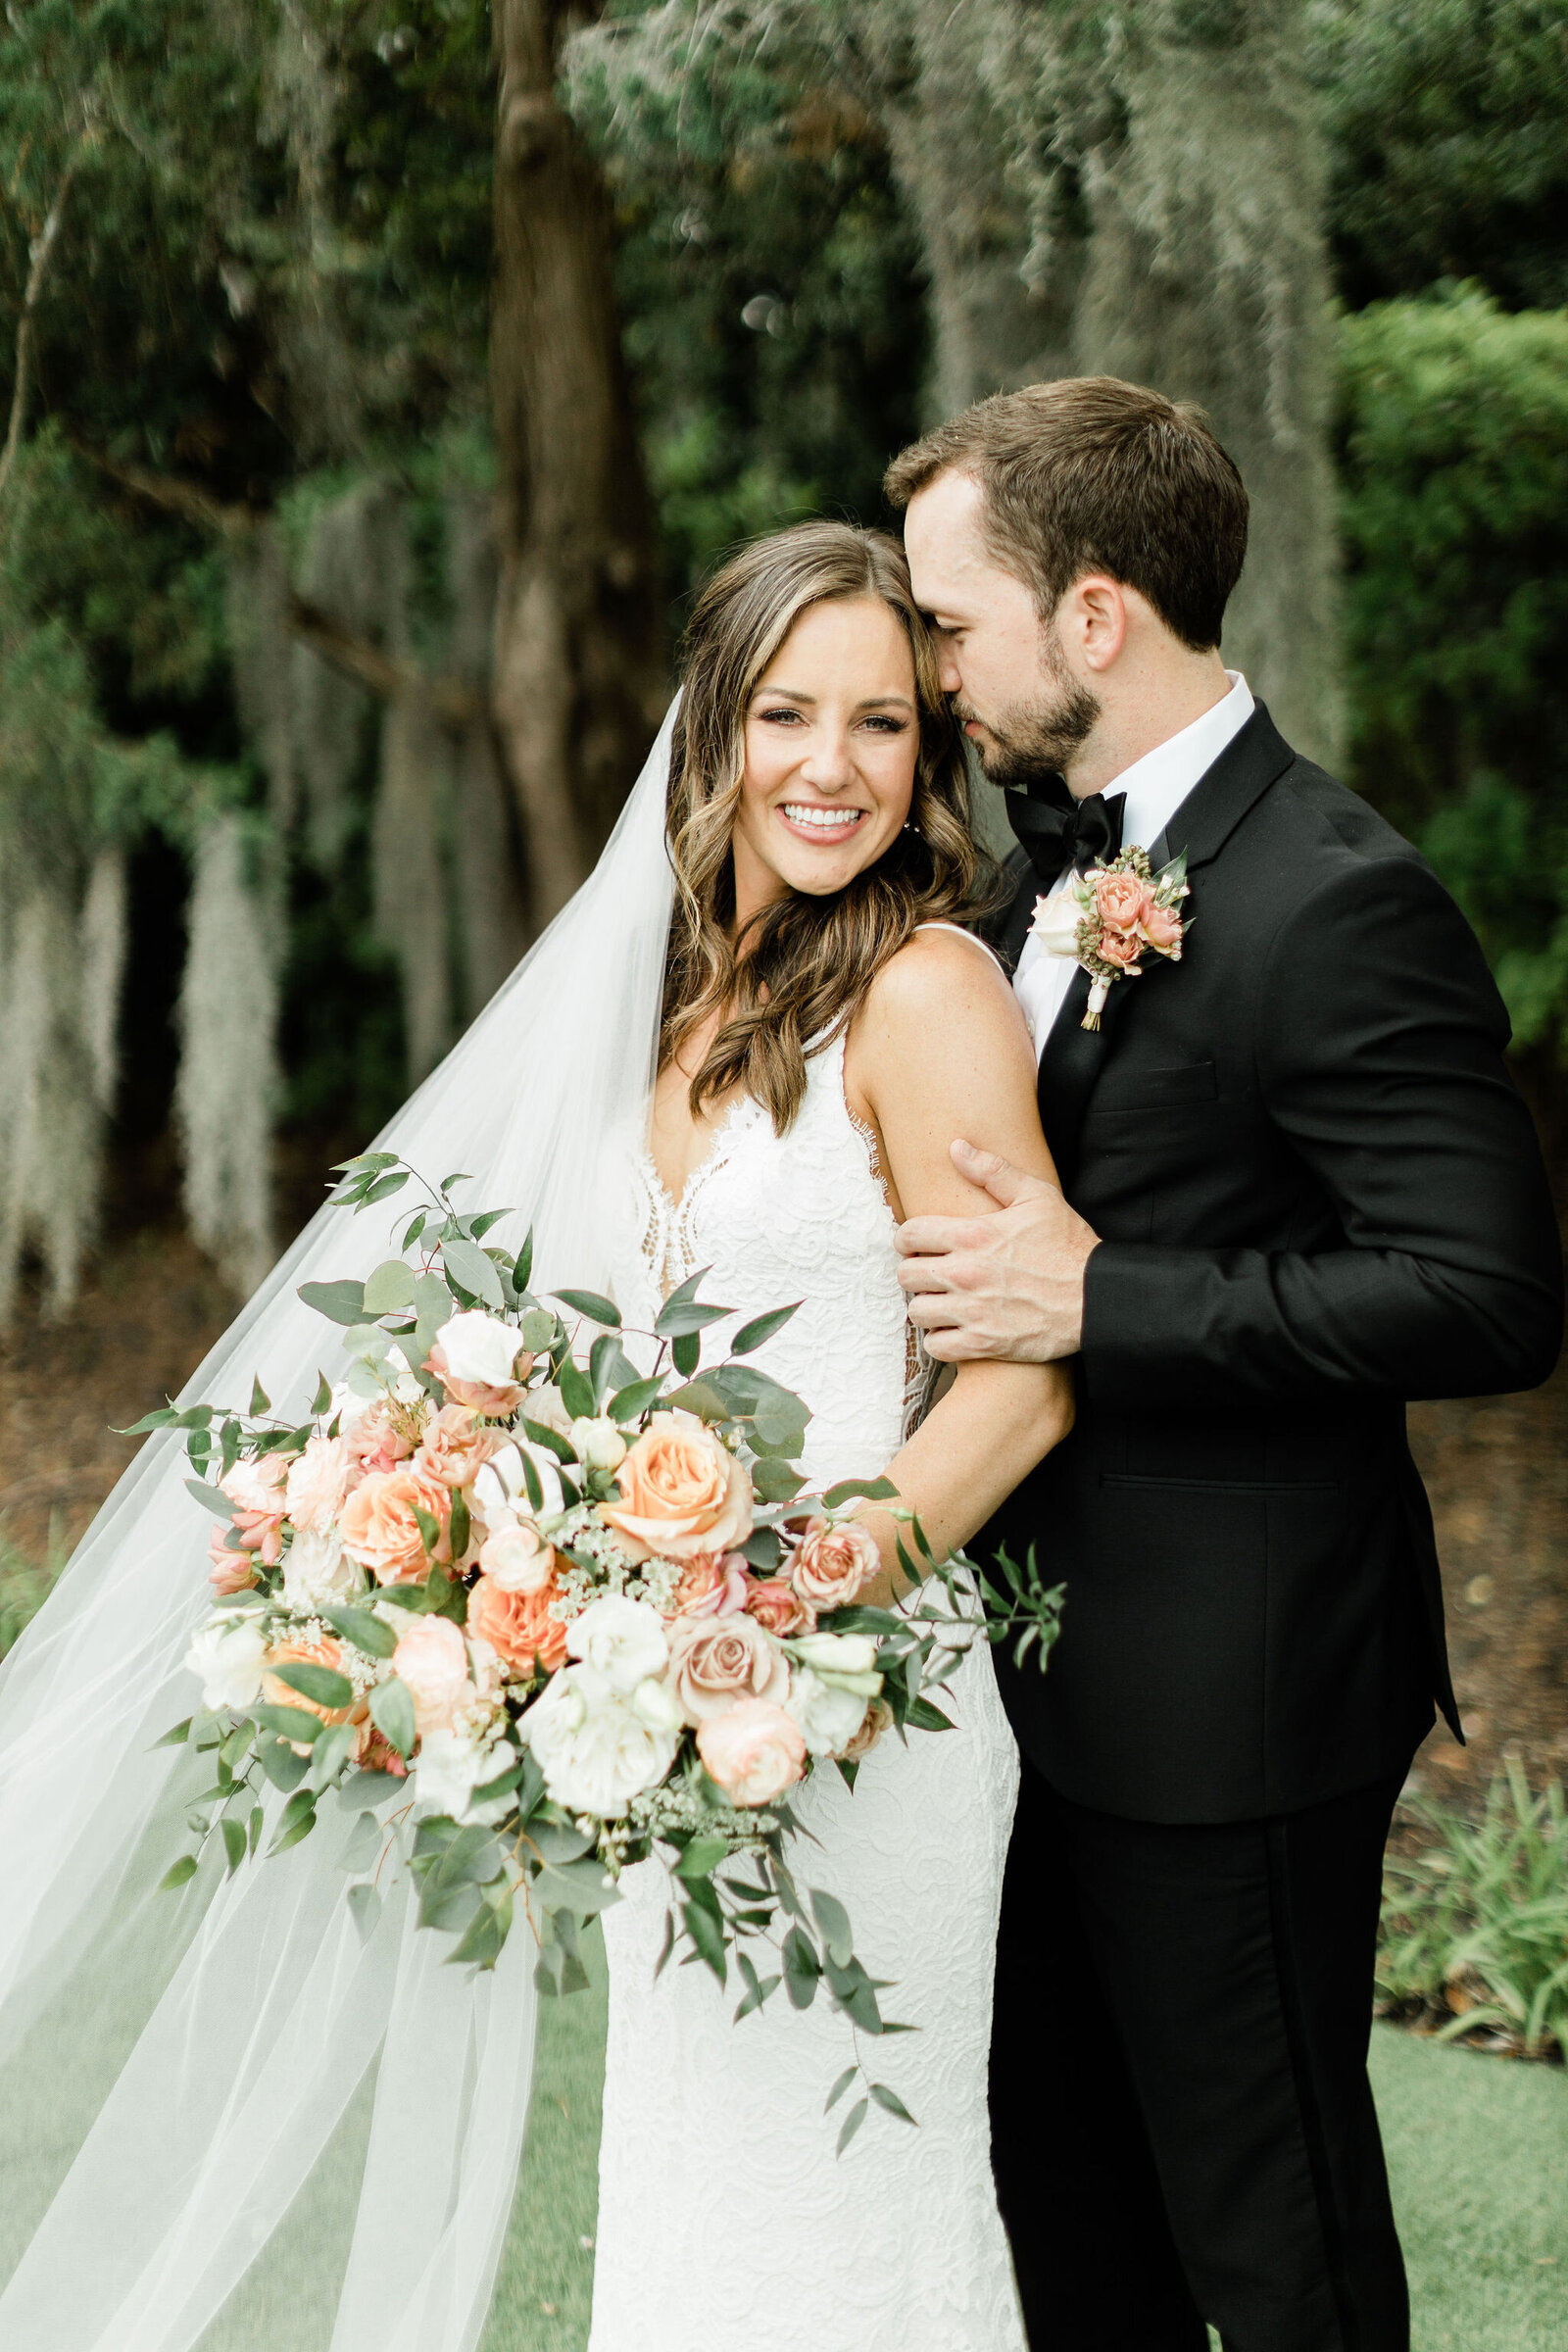 Wedding Day Outdoor Couples Photos | Wrightsville Manor, Wrightsville Beach NC | The Axtells Photo and Film